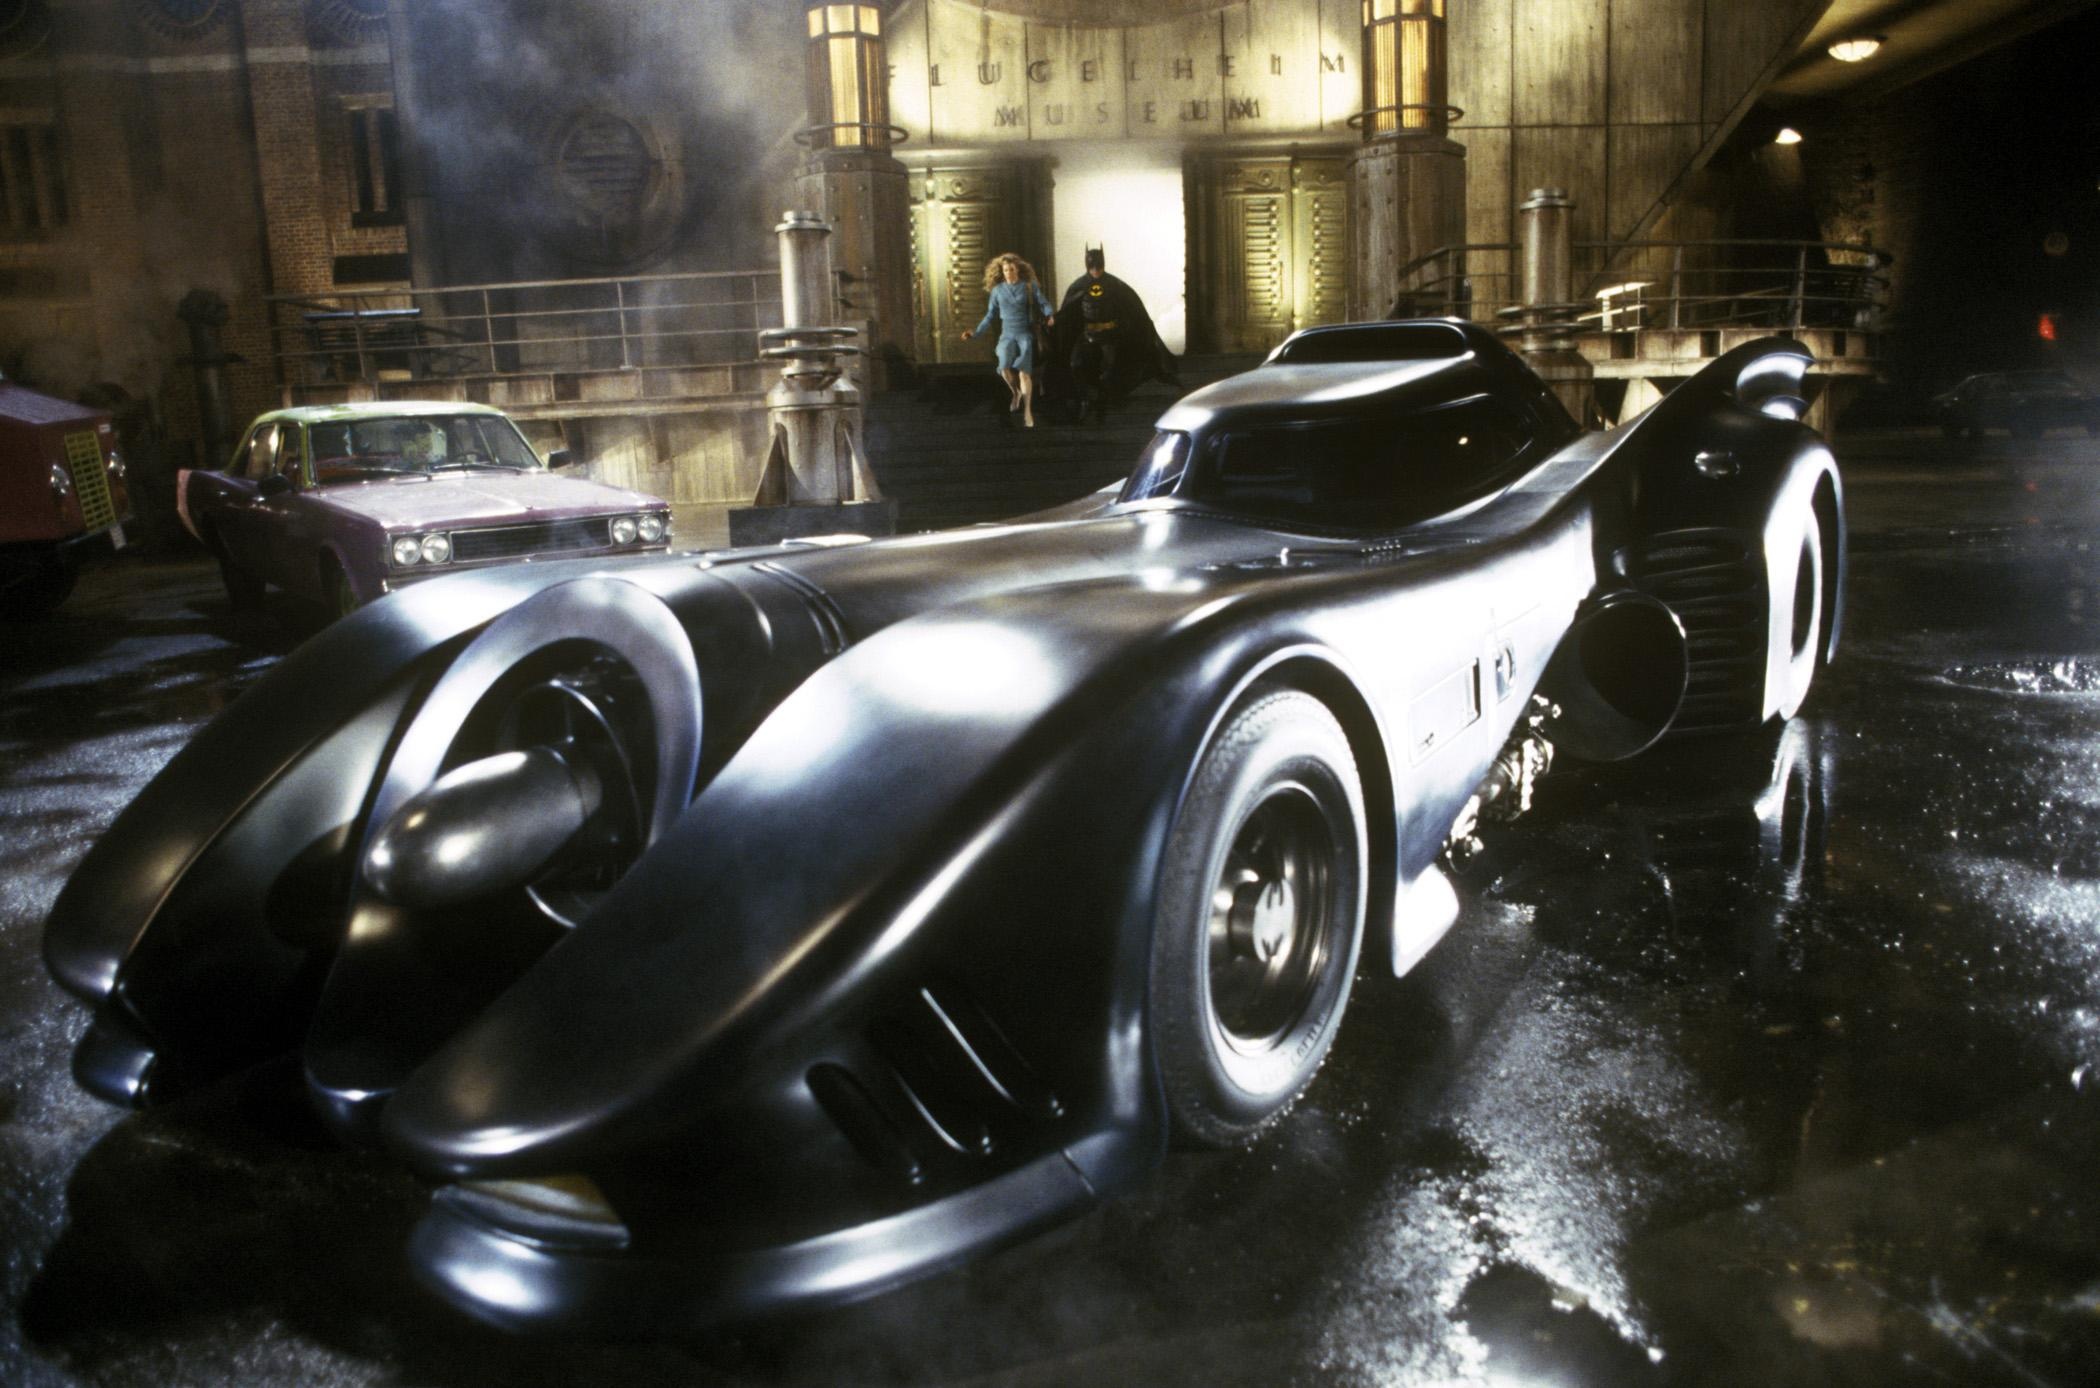 Batmobile wallpapers, High-quality vehicle pictures, 4K wallpapers, Stunning vehicle photography, 2100x1390 HD Desktop